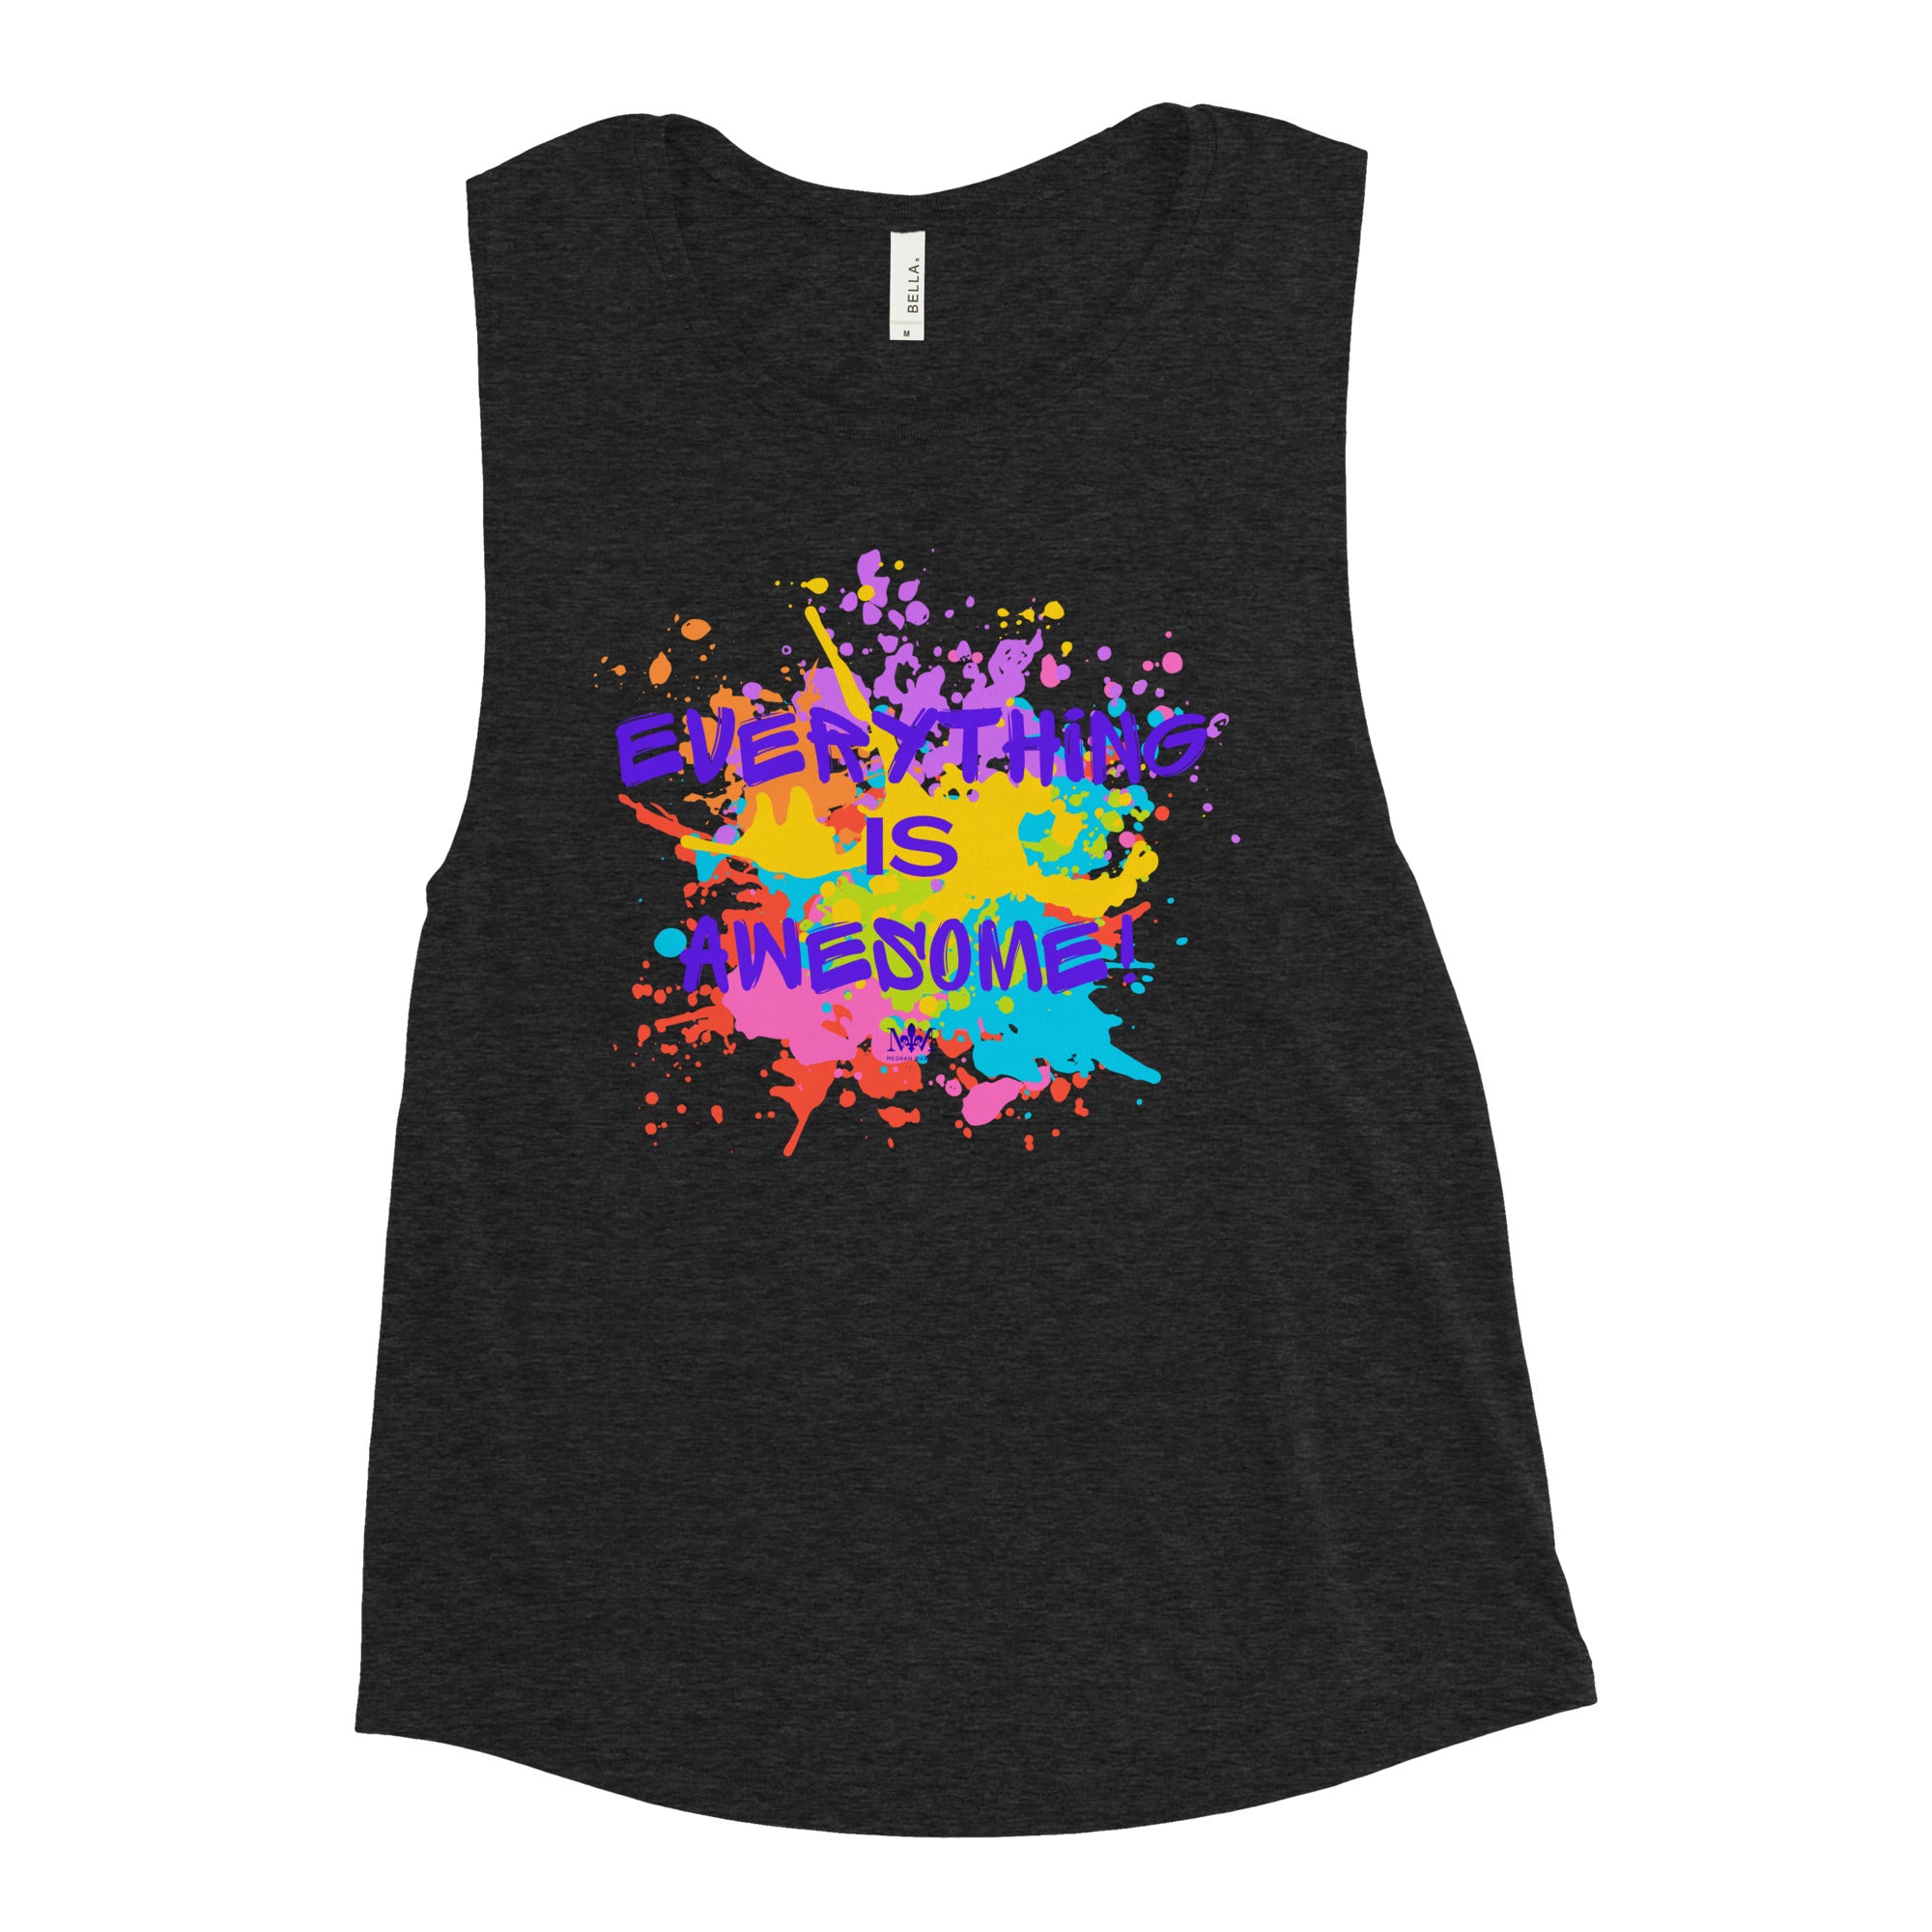 Everything is Awesome Ladies’ Muscle Tank